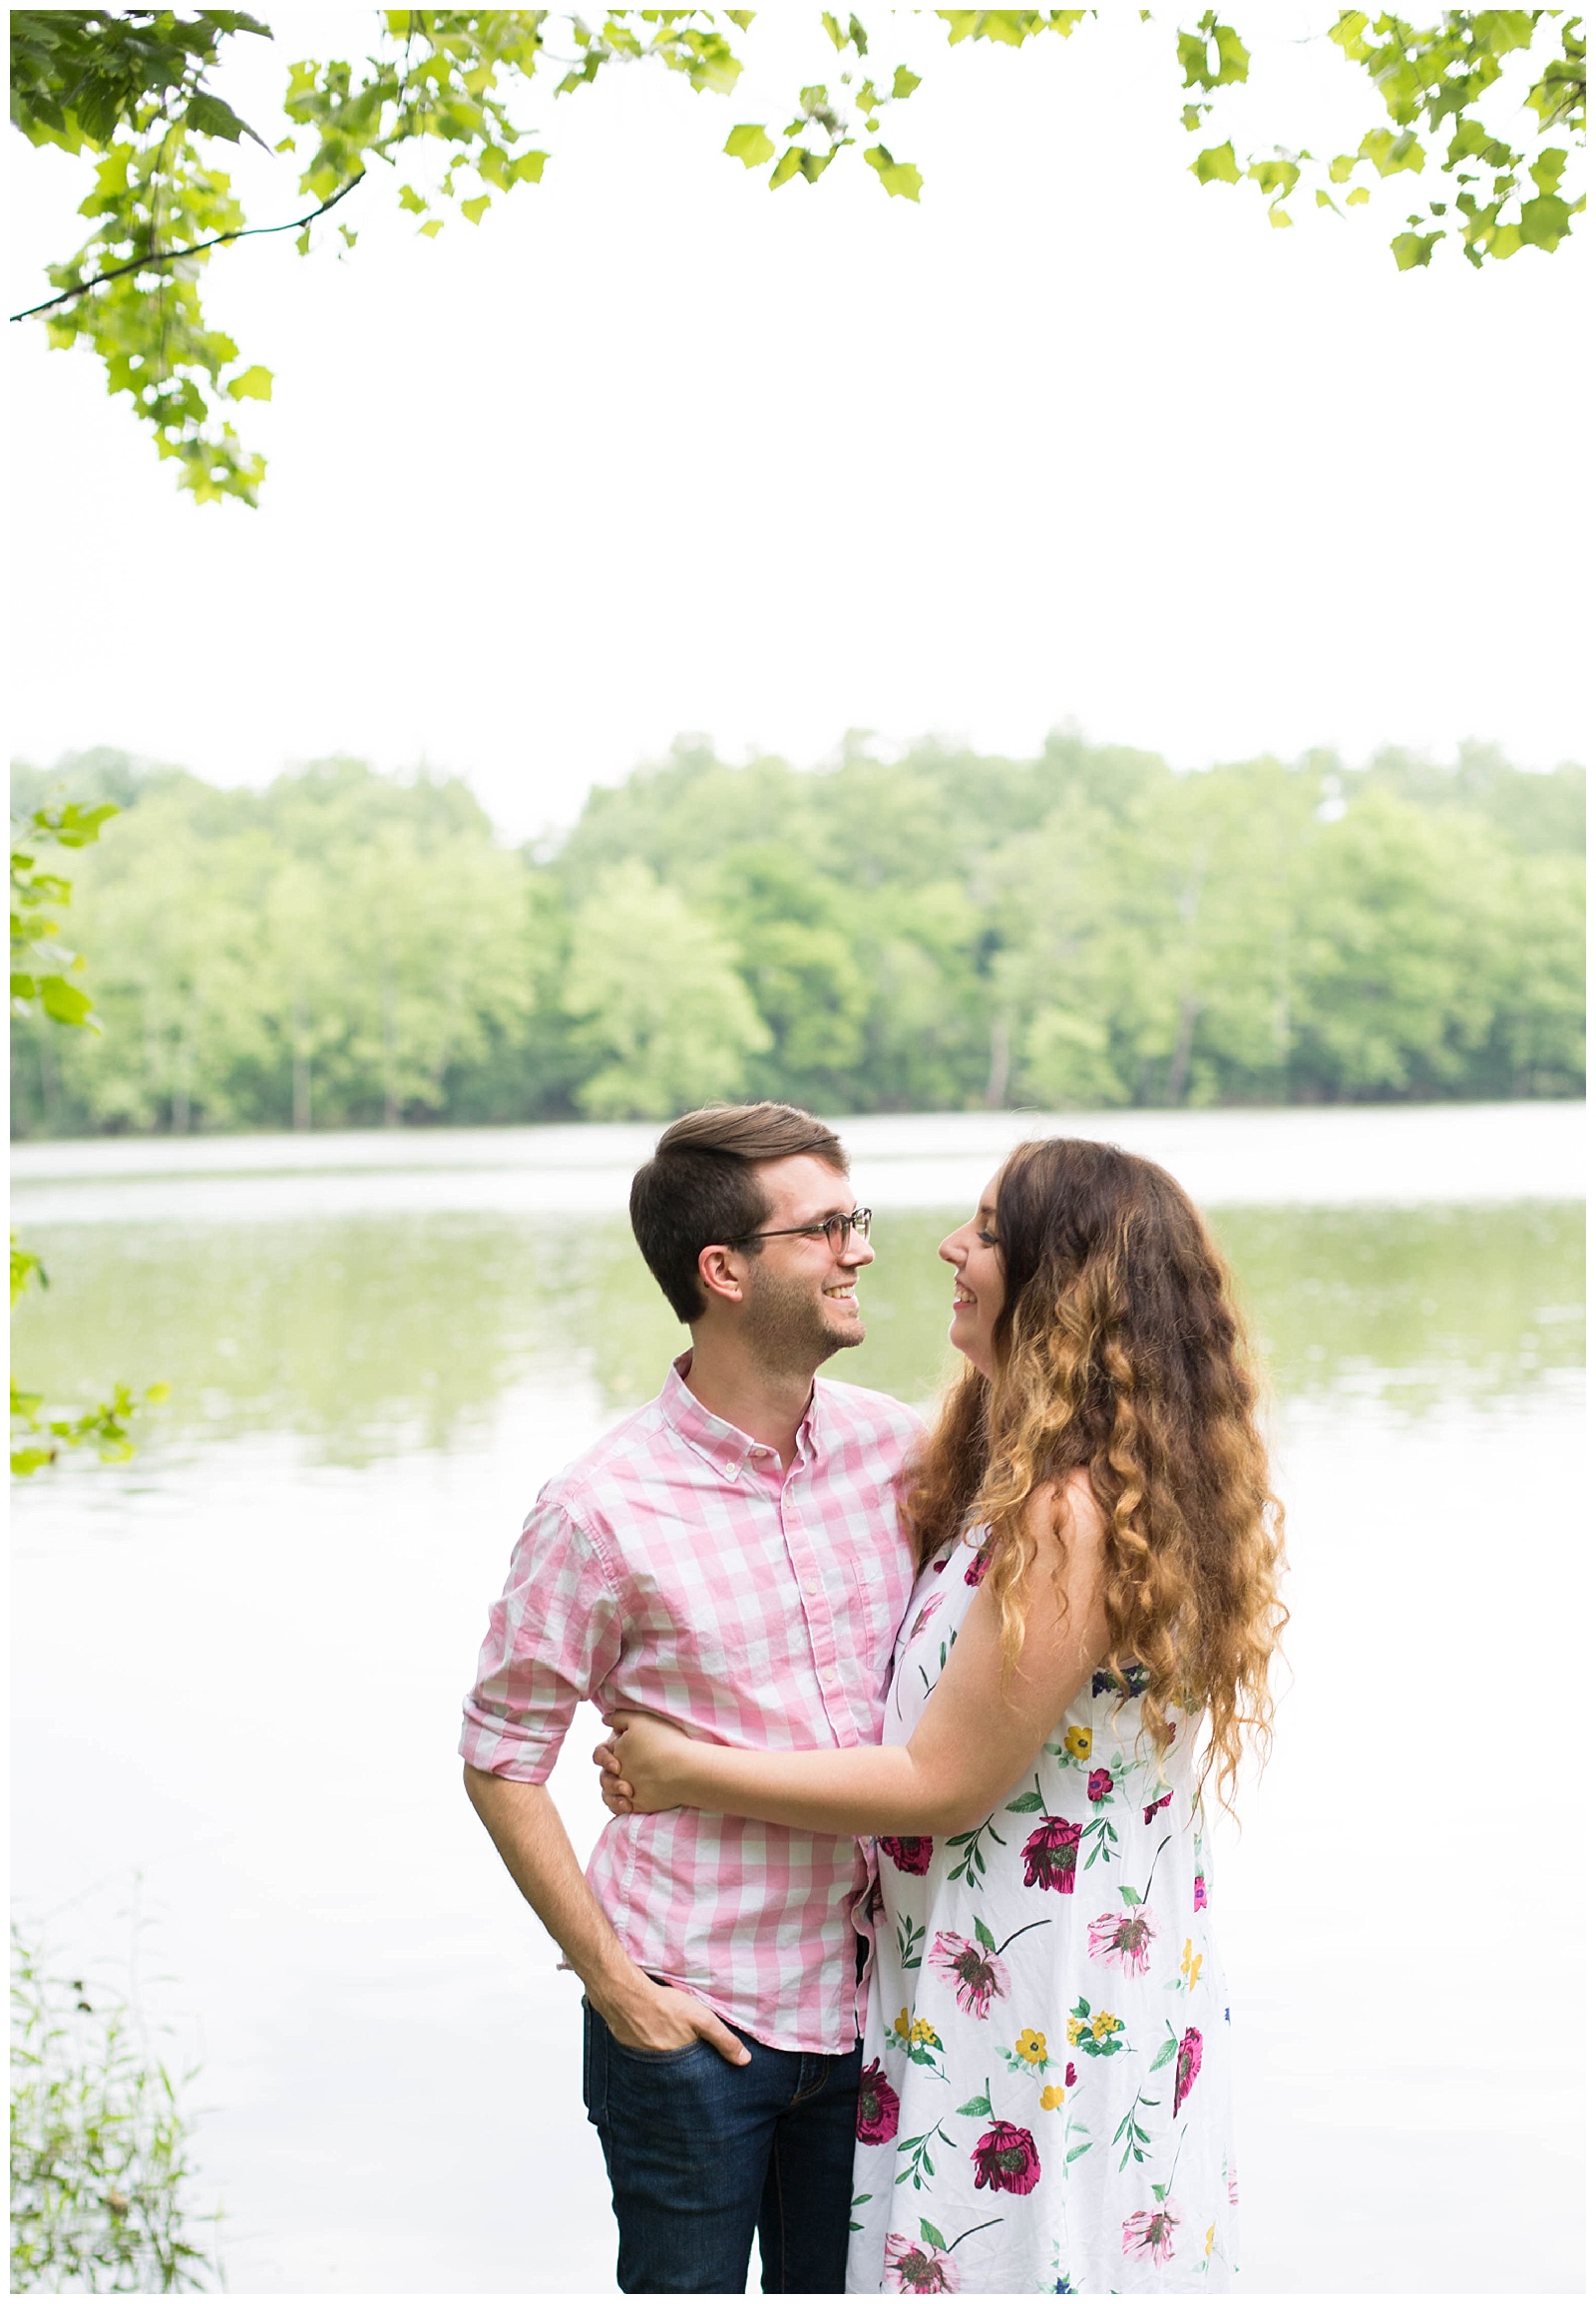 Indianapolis Engagement Session | Monica Brown Photography | monicabrownphoto.com